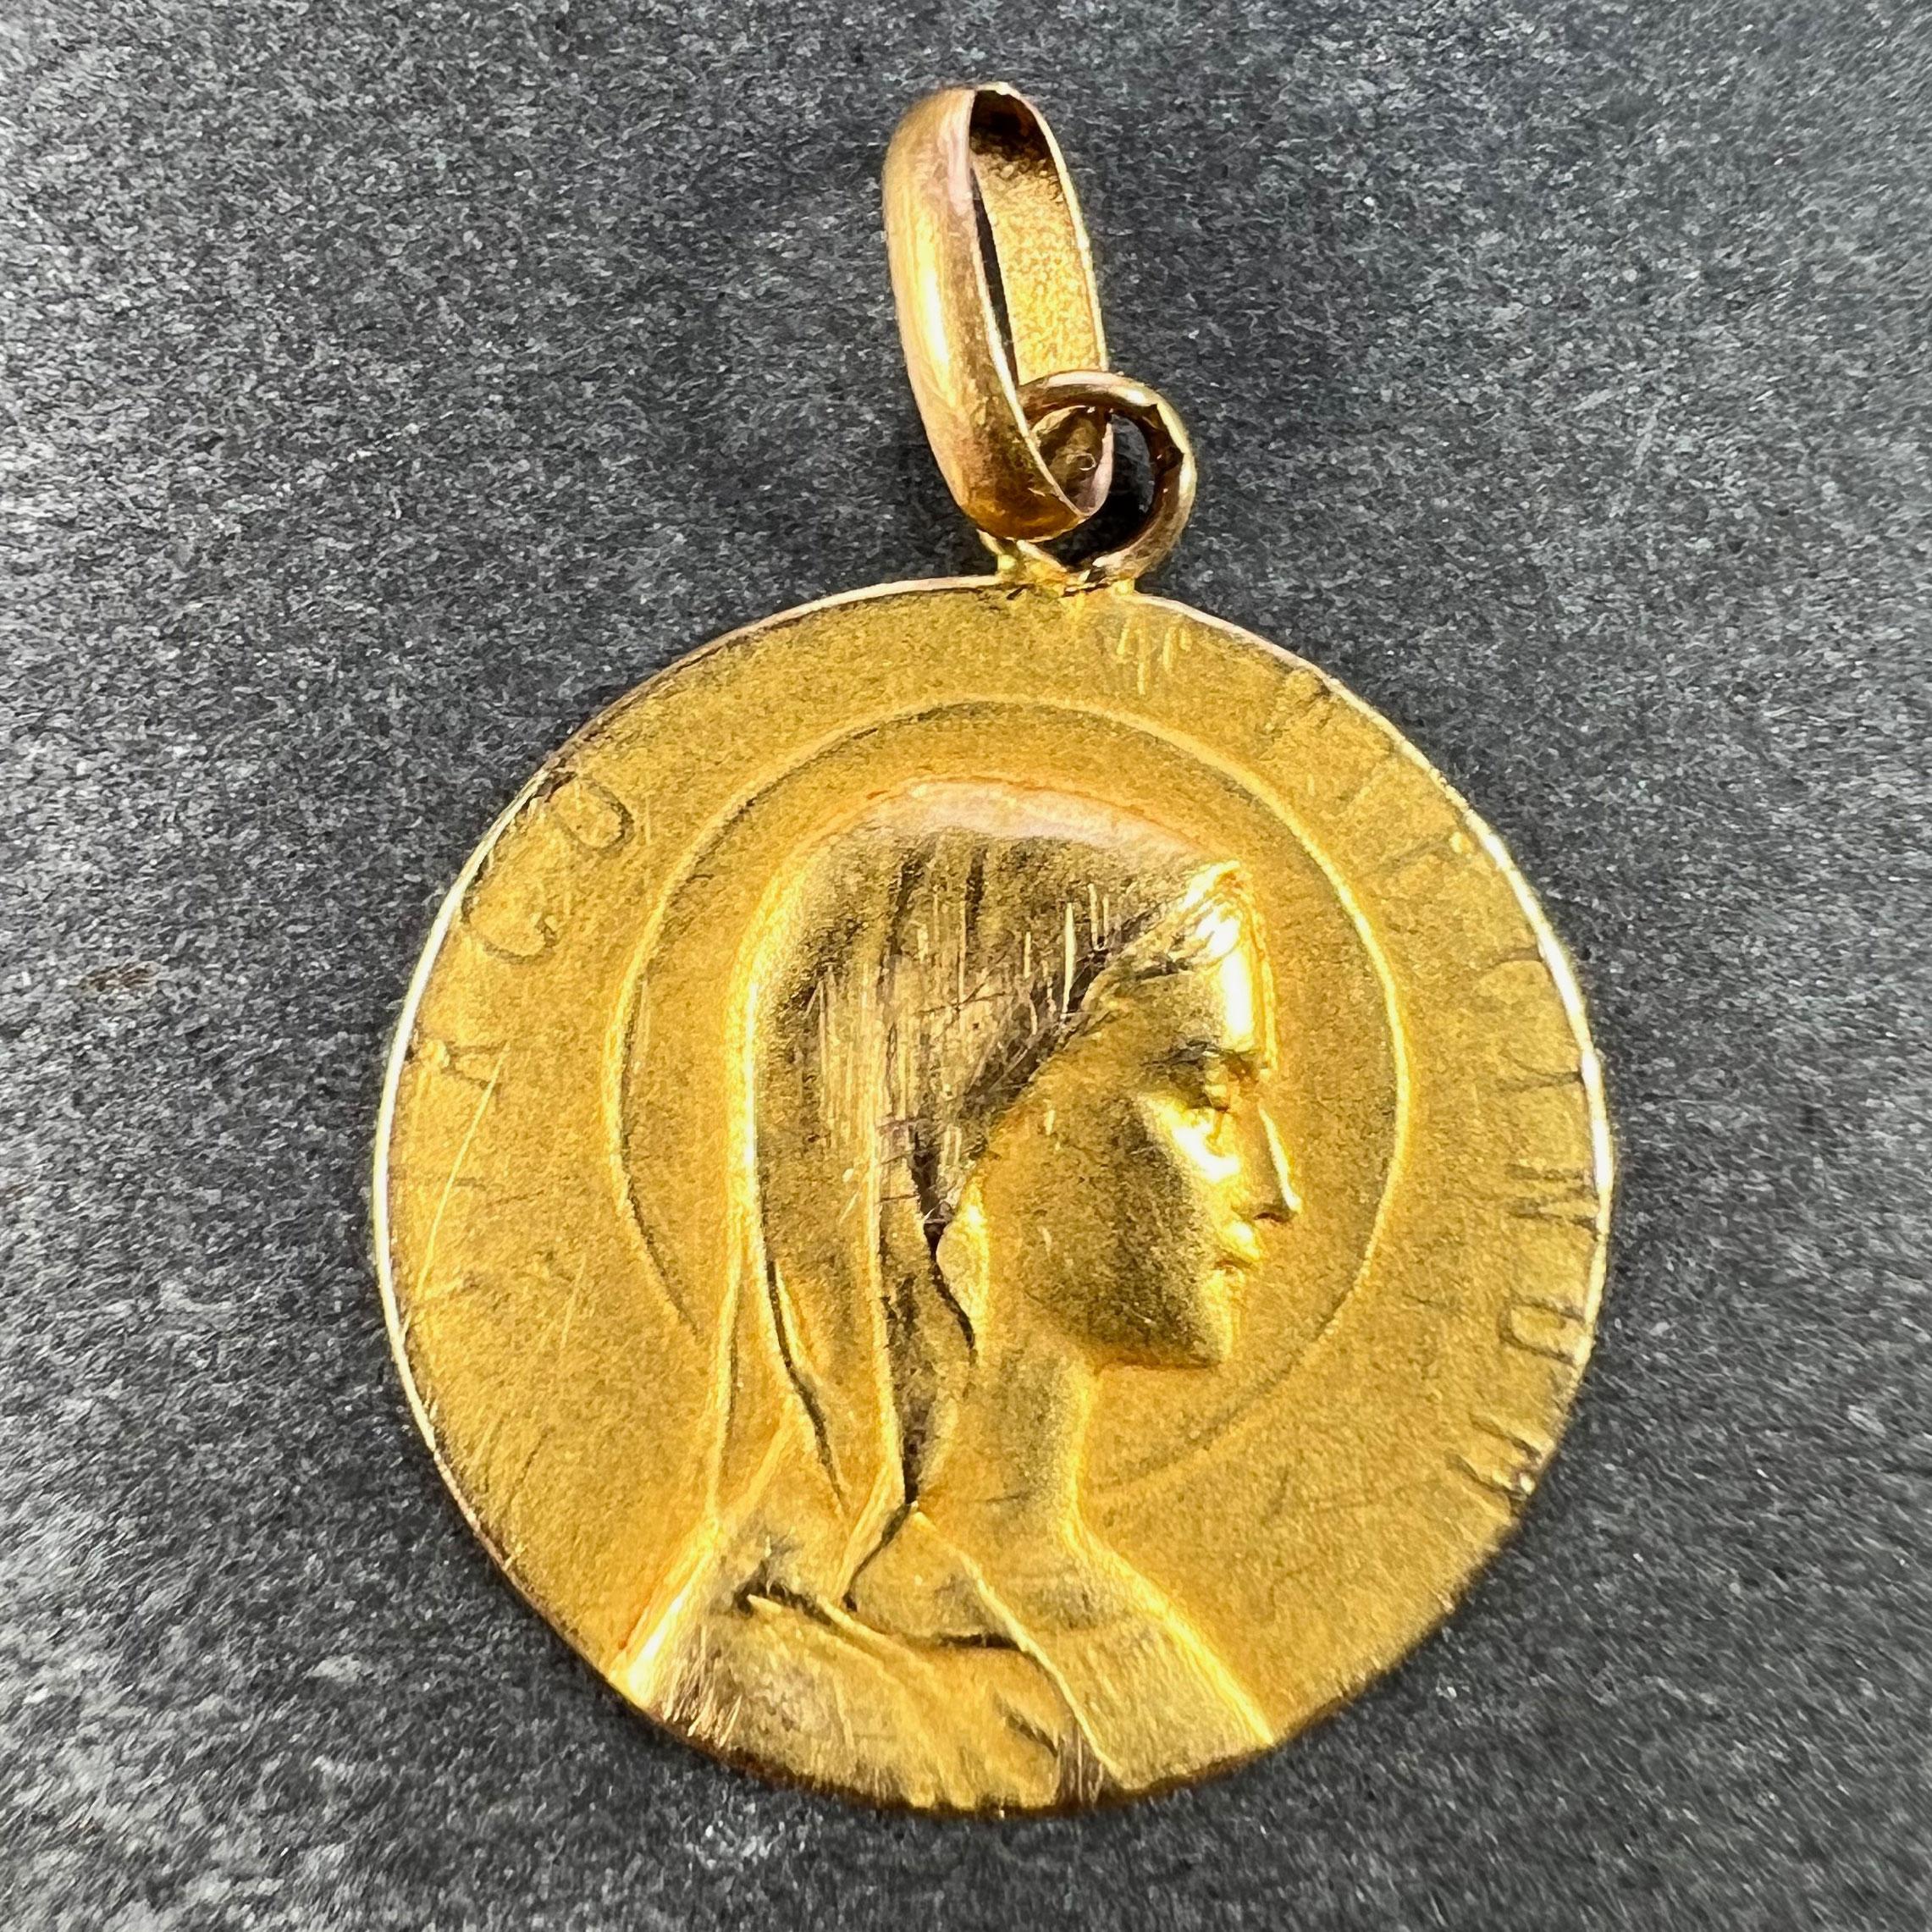 A French 18 karat (18K) yellow gold charm pendant designed as a round medal with a relief of the Virgin Mary in profile with a halo, with the Latin motto 'VIRGO VIRGINUM' (Virgin of Virgins) surrounding. The reverse depicts a book or bible with a